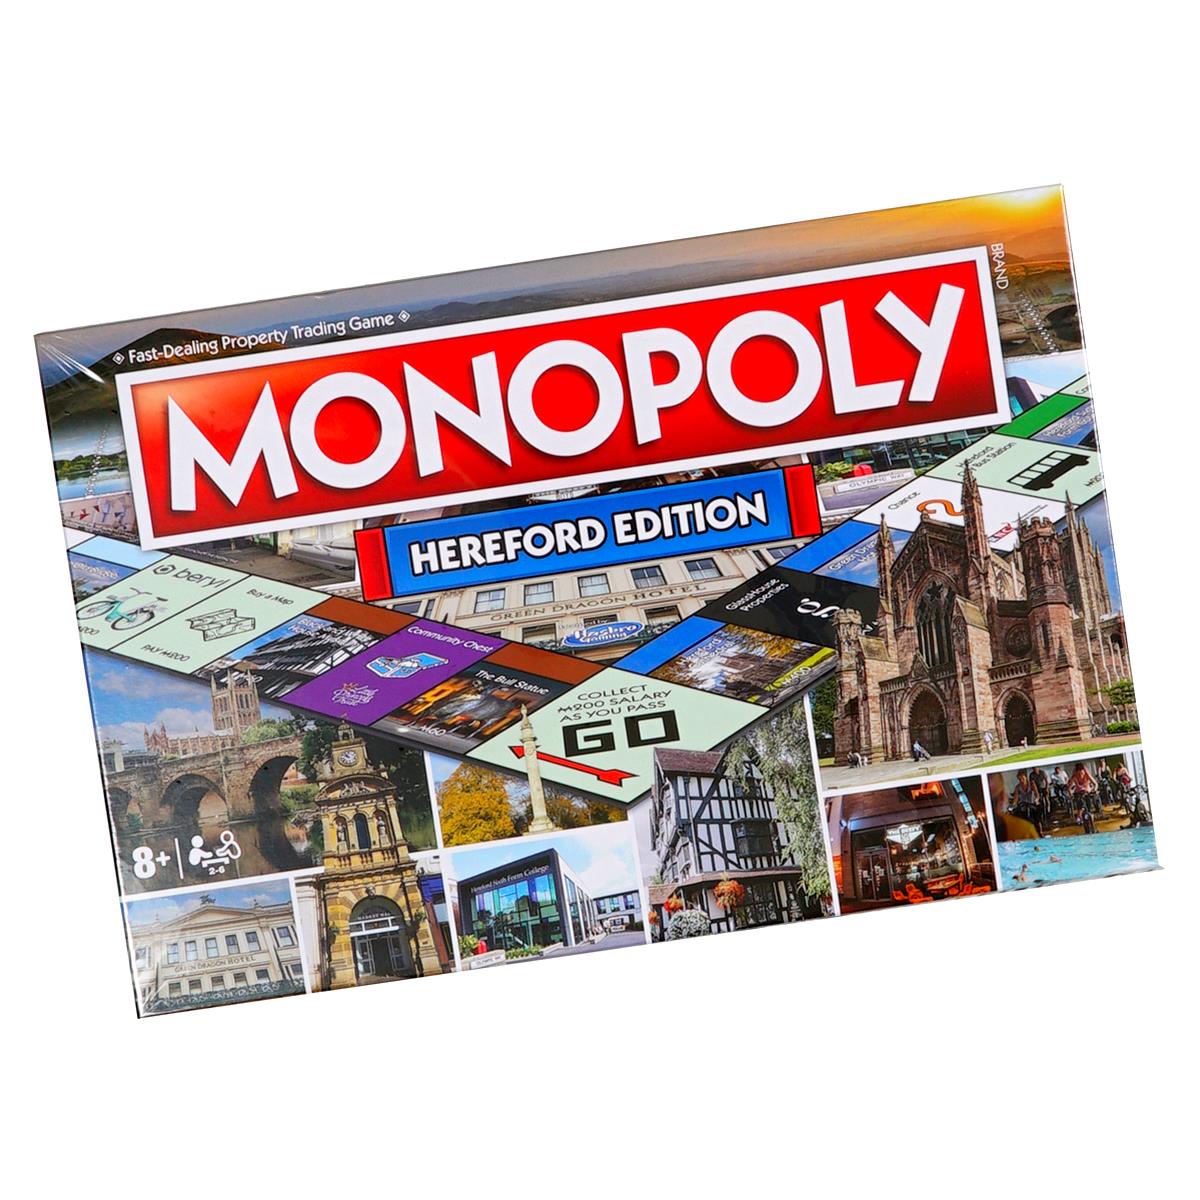 What actions are available in the Hereford Monopoly game?